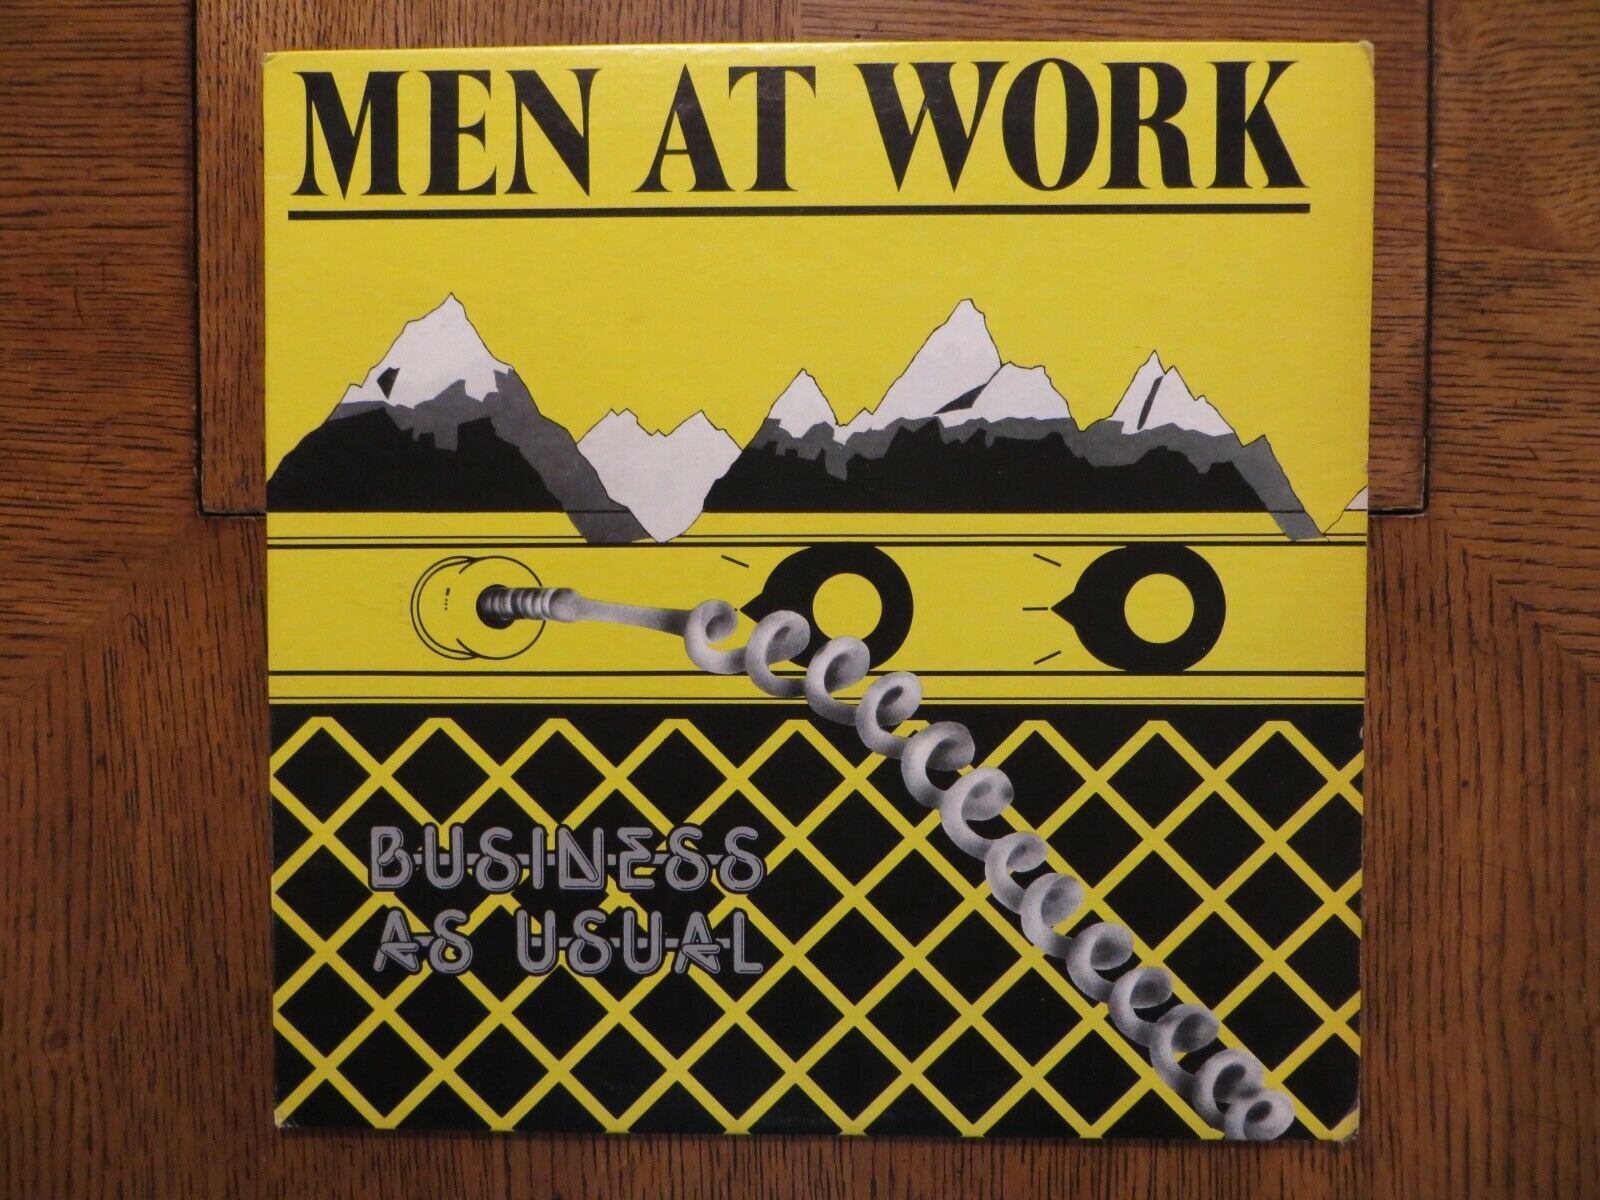 Men At Work – Business As Usual - 1982 - Columbia FC 37978 Vinyl LP VG+/VG+